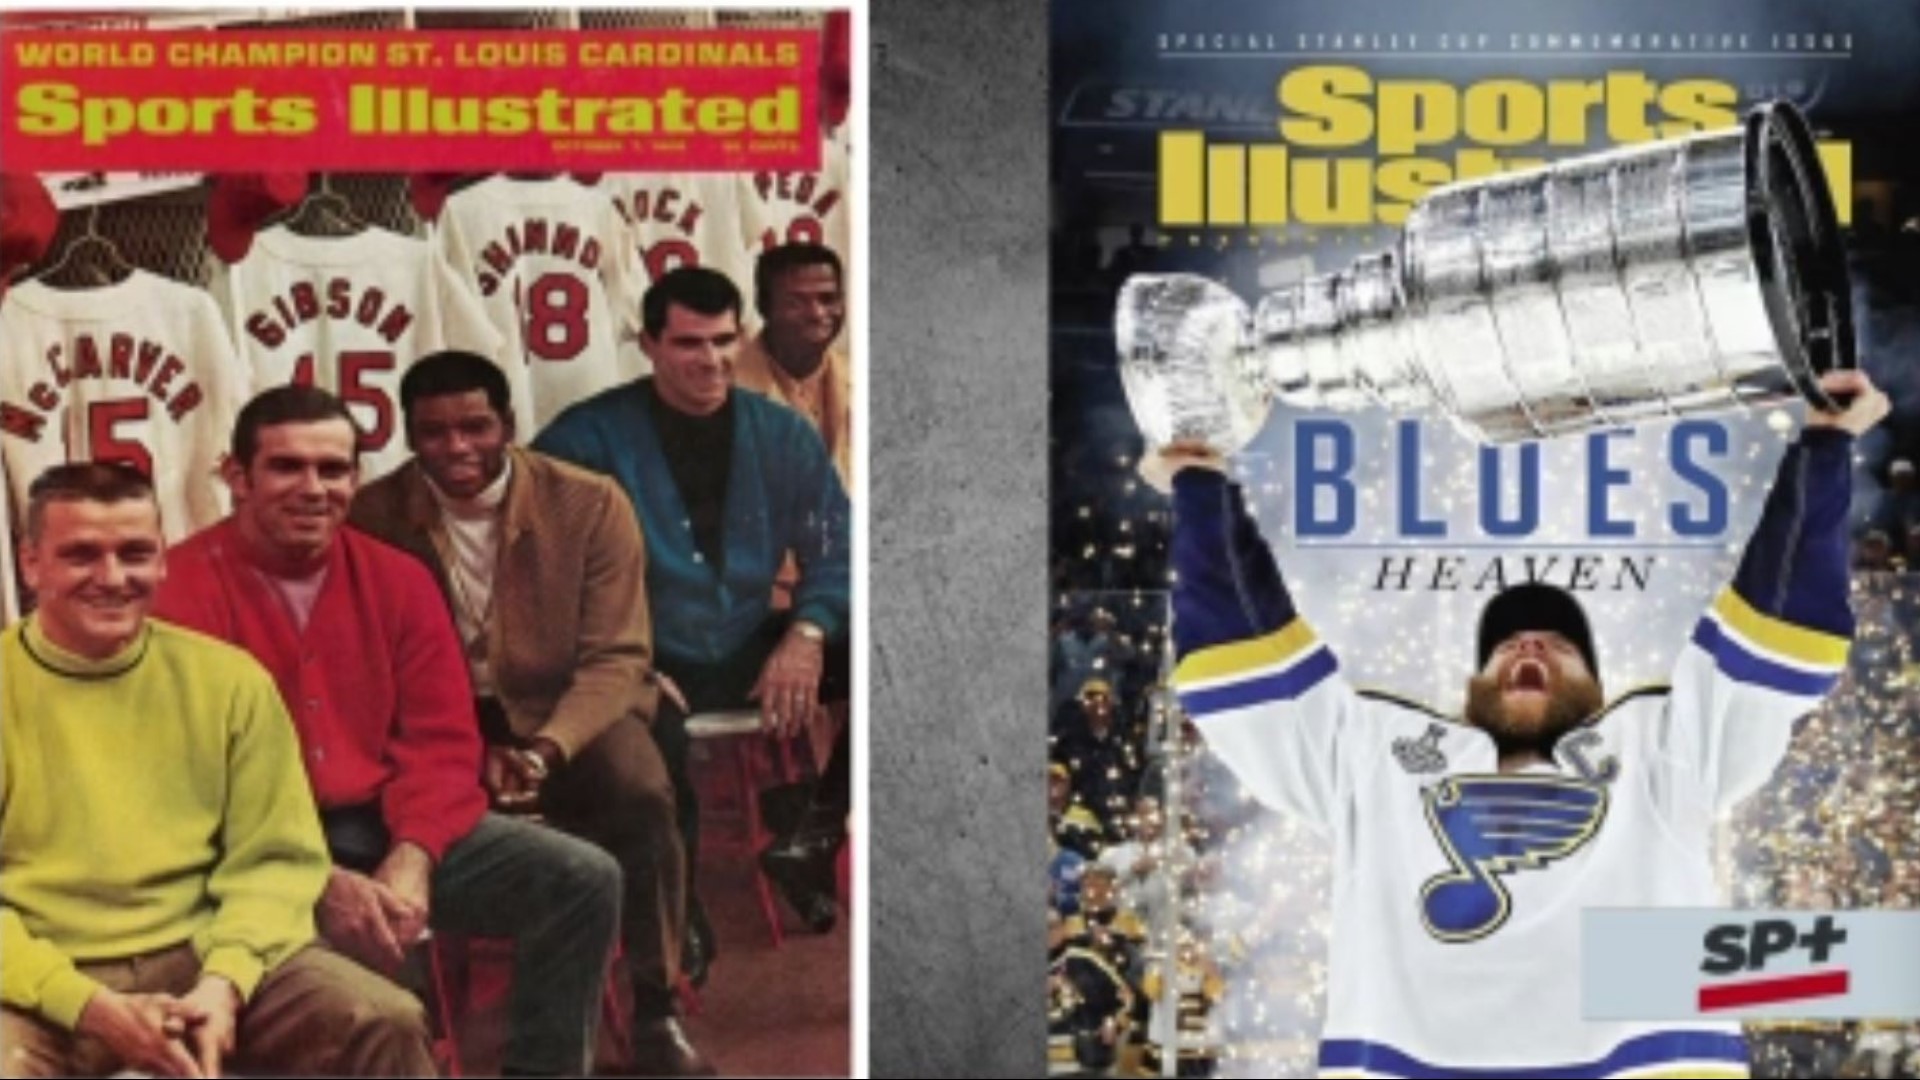 Sports Illustrated has let go of most, if not all of their staff, a report says. Here's a look back at some of the best covers featuring St. Louis.